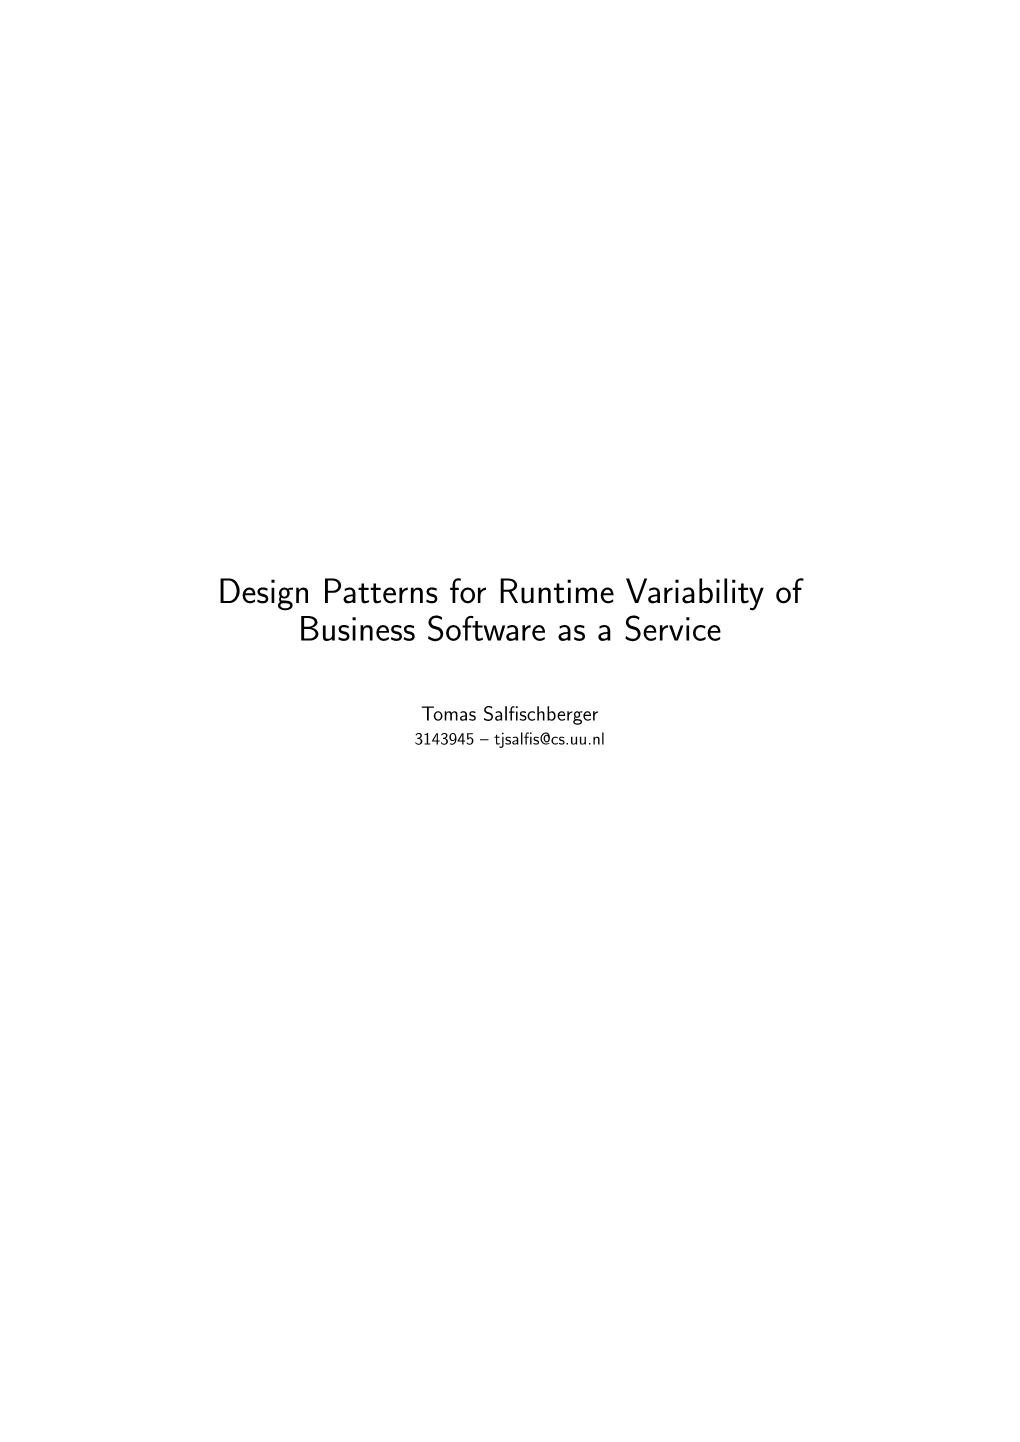 Design Patterns for Runtime Variability of Business Software As a Service